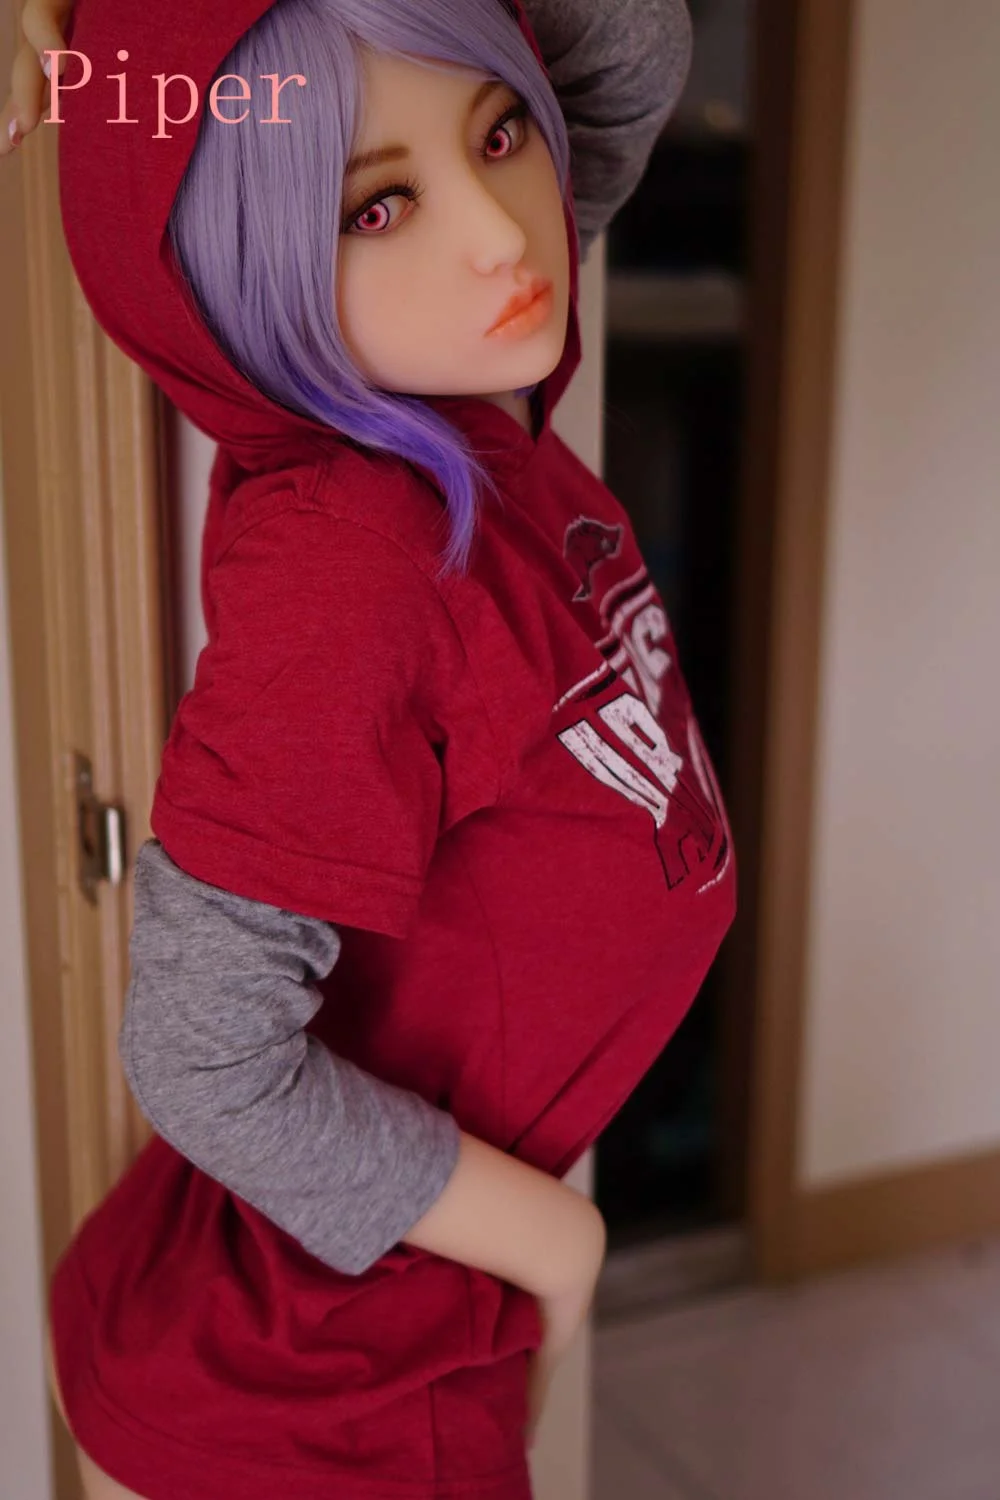 Sex doll with hands touching belly